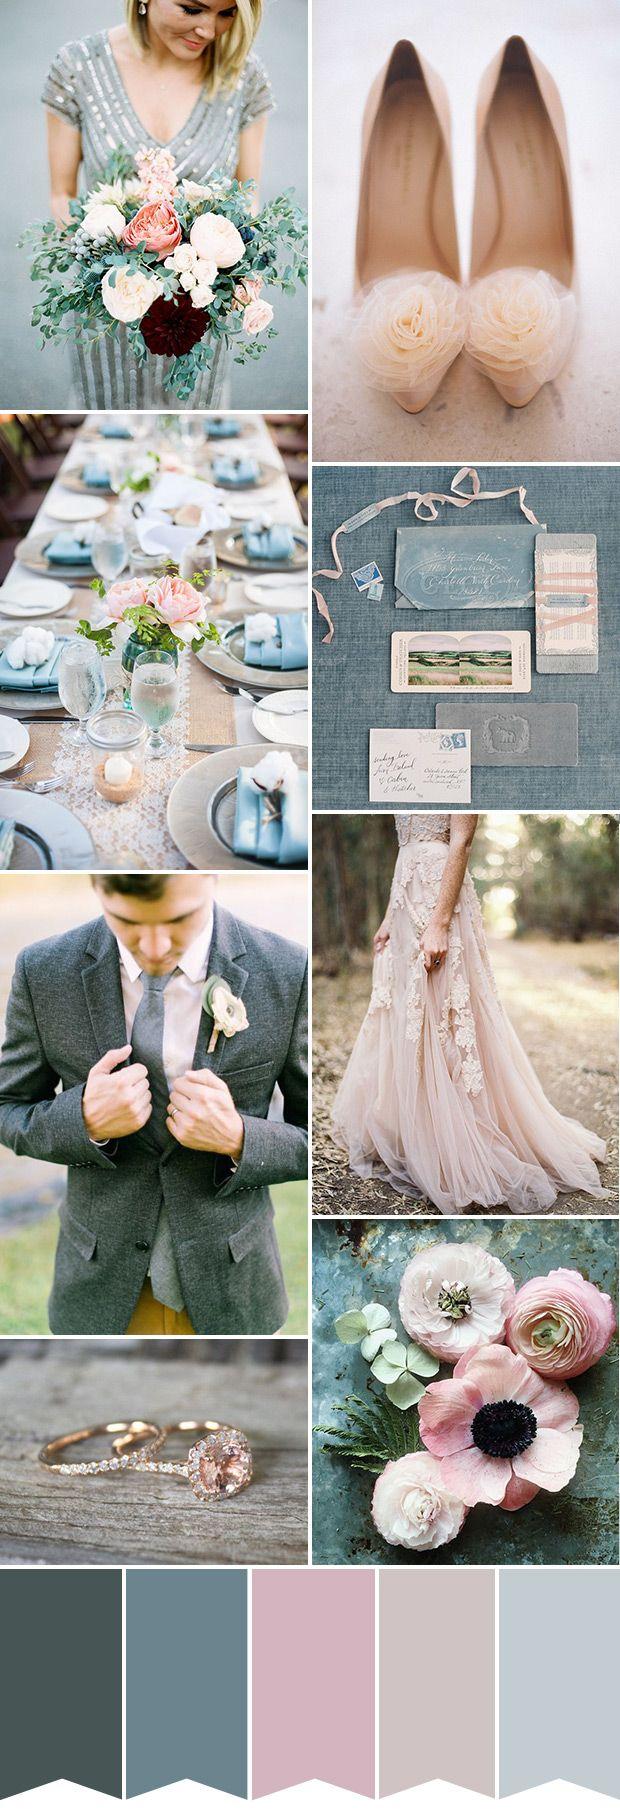 Wedding - Soft Pink And Dove Grey: An Alternative Fall Colour Palette